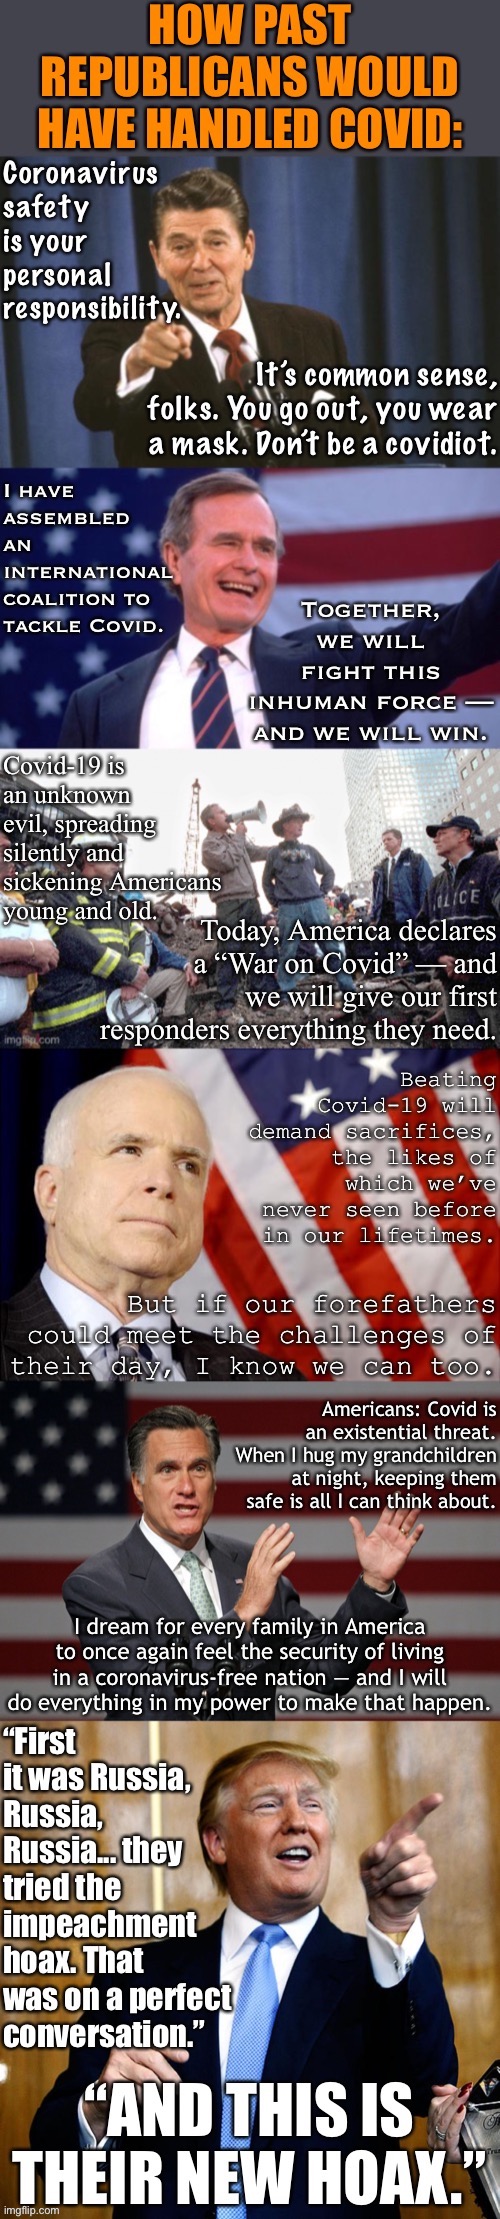 V long meme time (v rare self-cringe) | image tagged in how past republicans would have handled covid | made w/ Imgflip meme maker